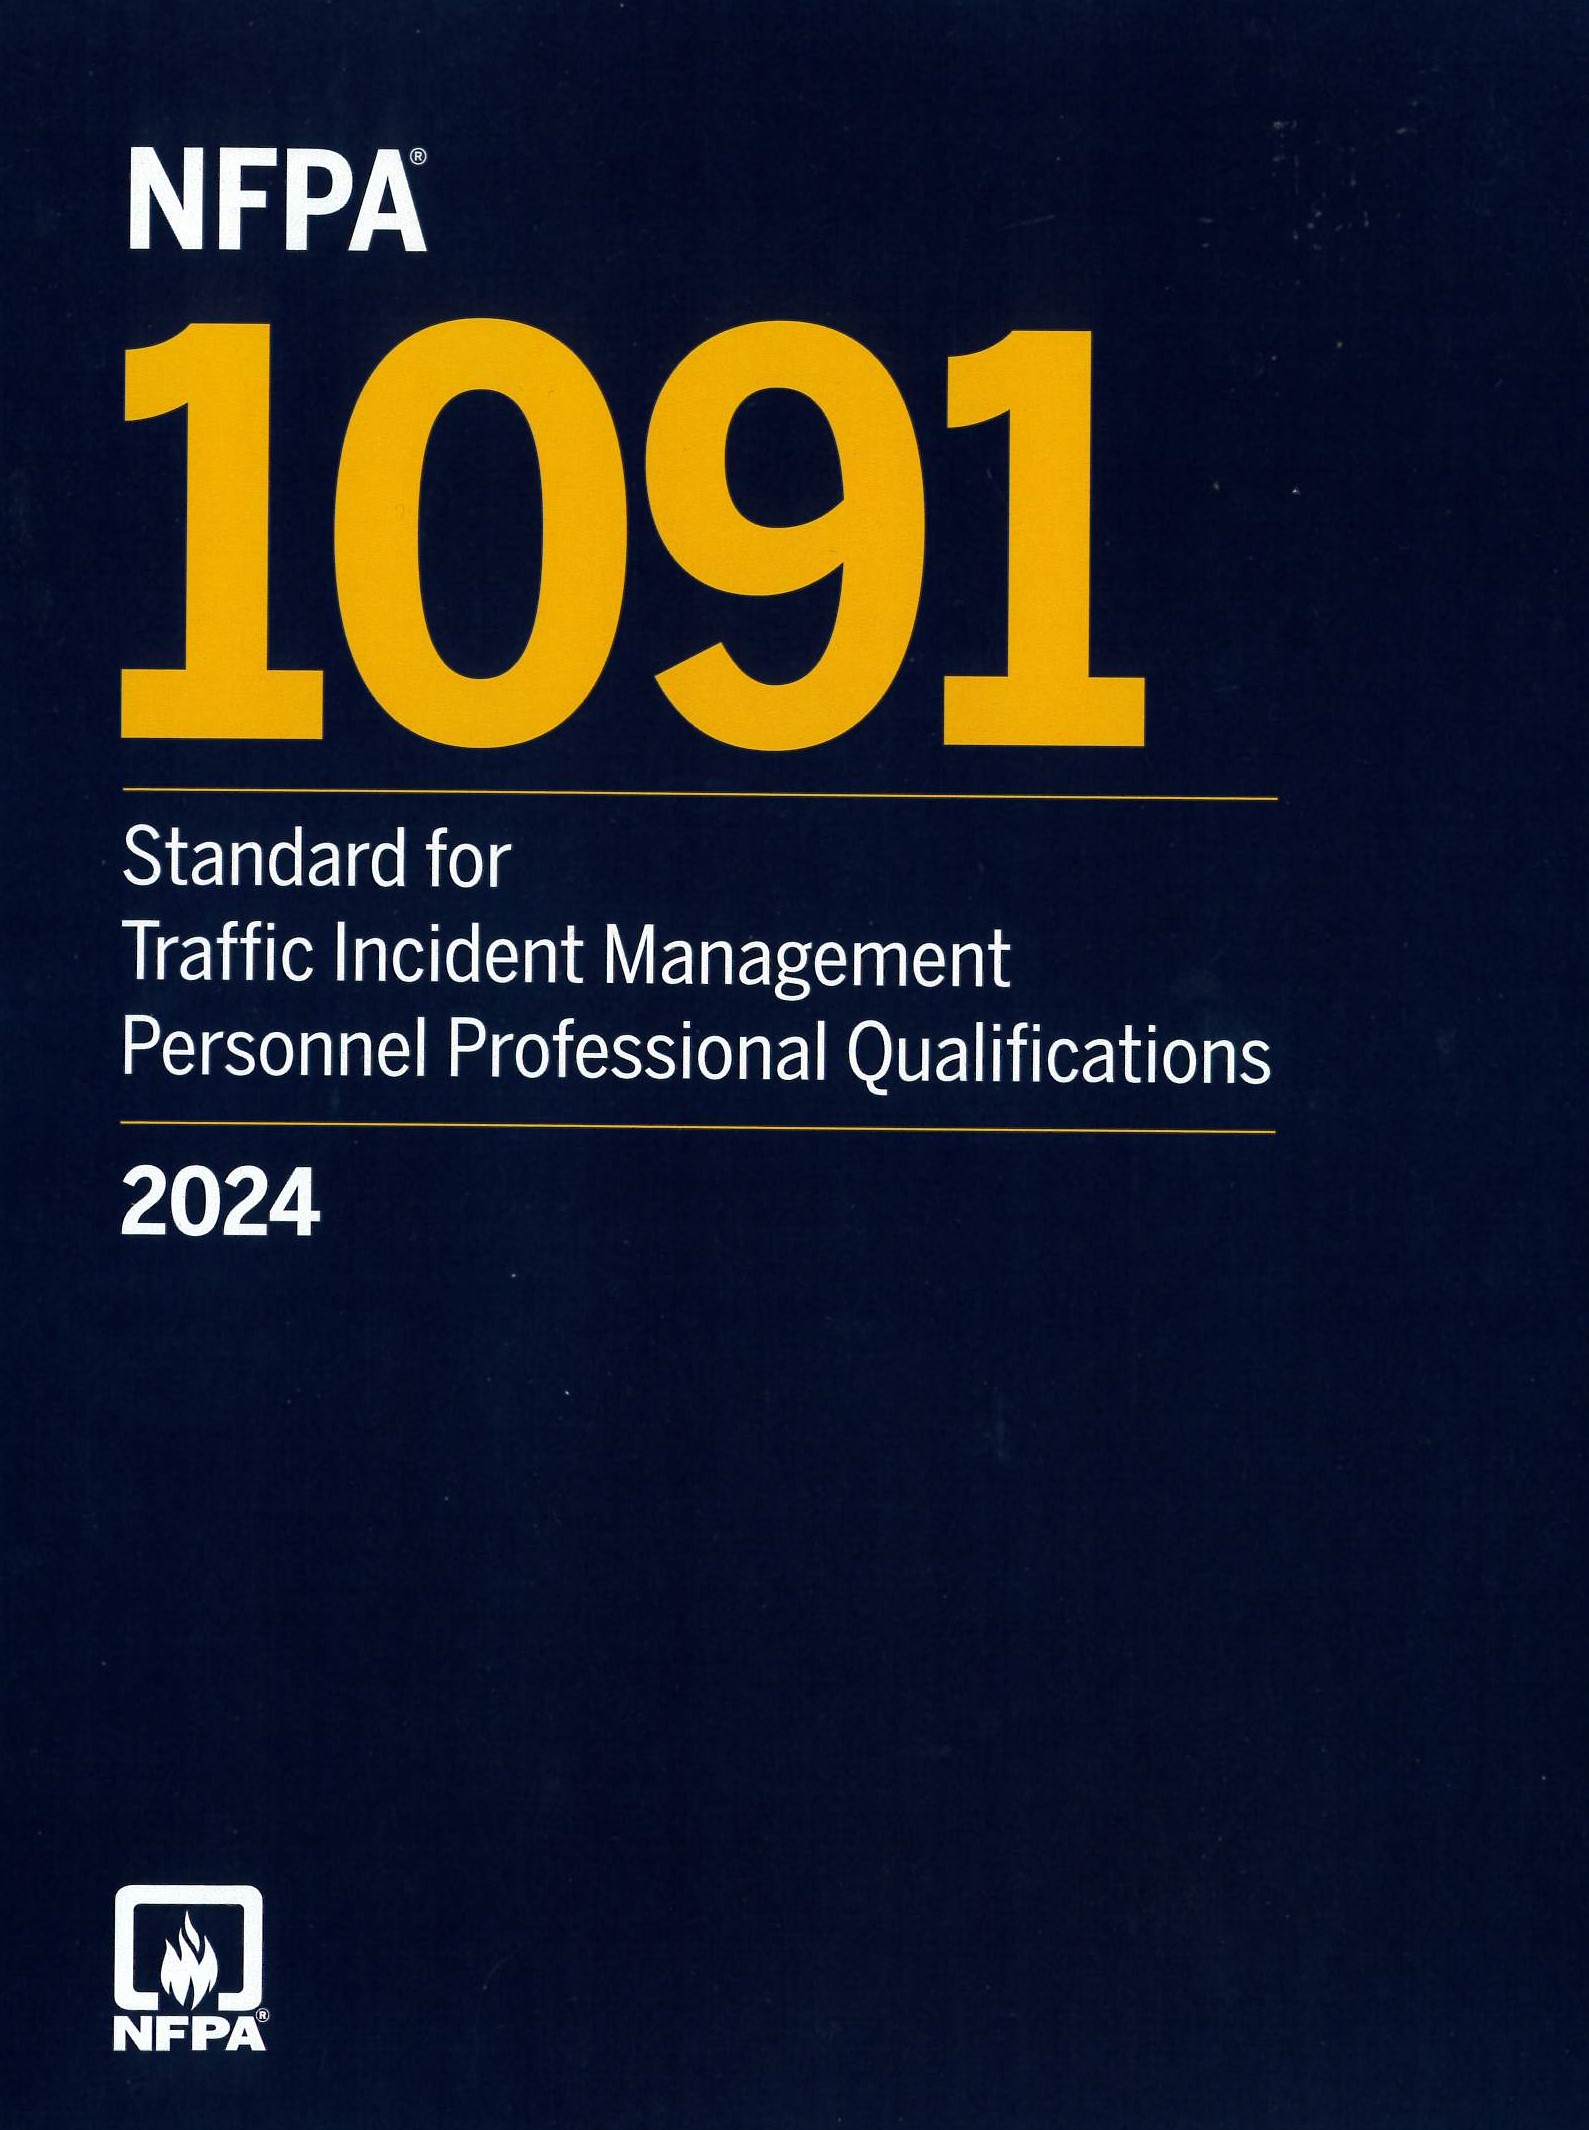 NFPA 1091 2024 Traffic Incident Management Personnel Professional Qualifications